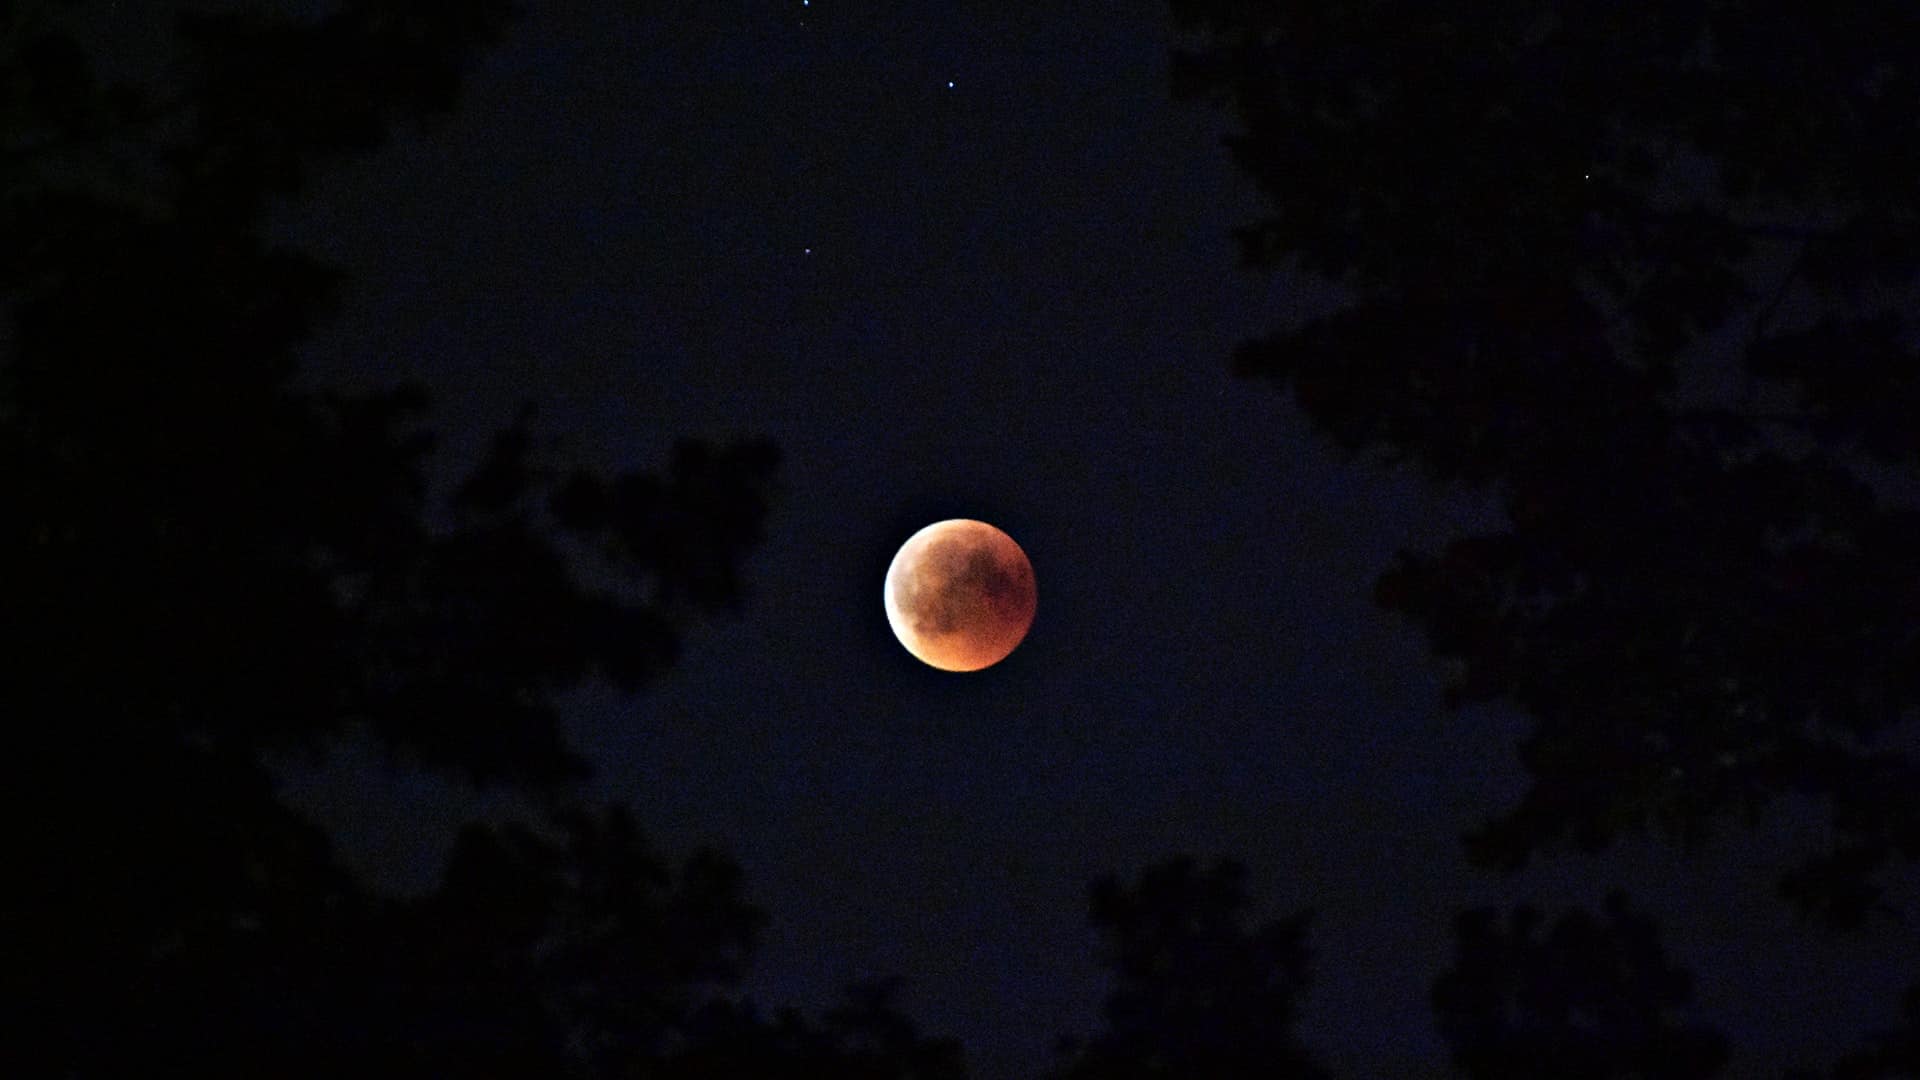 Don’t miss the longest partial lunar eclipse in 600 years this Friday